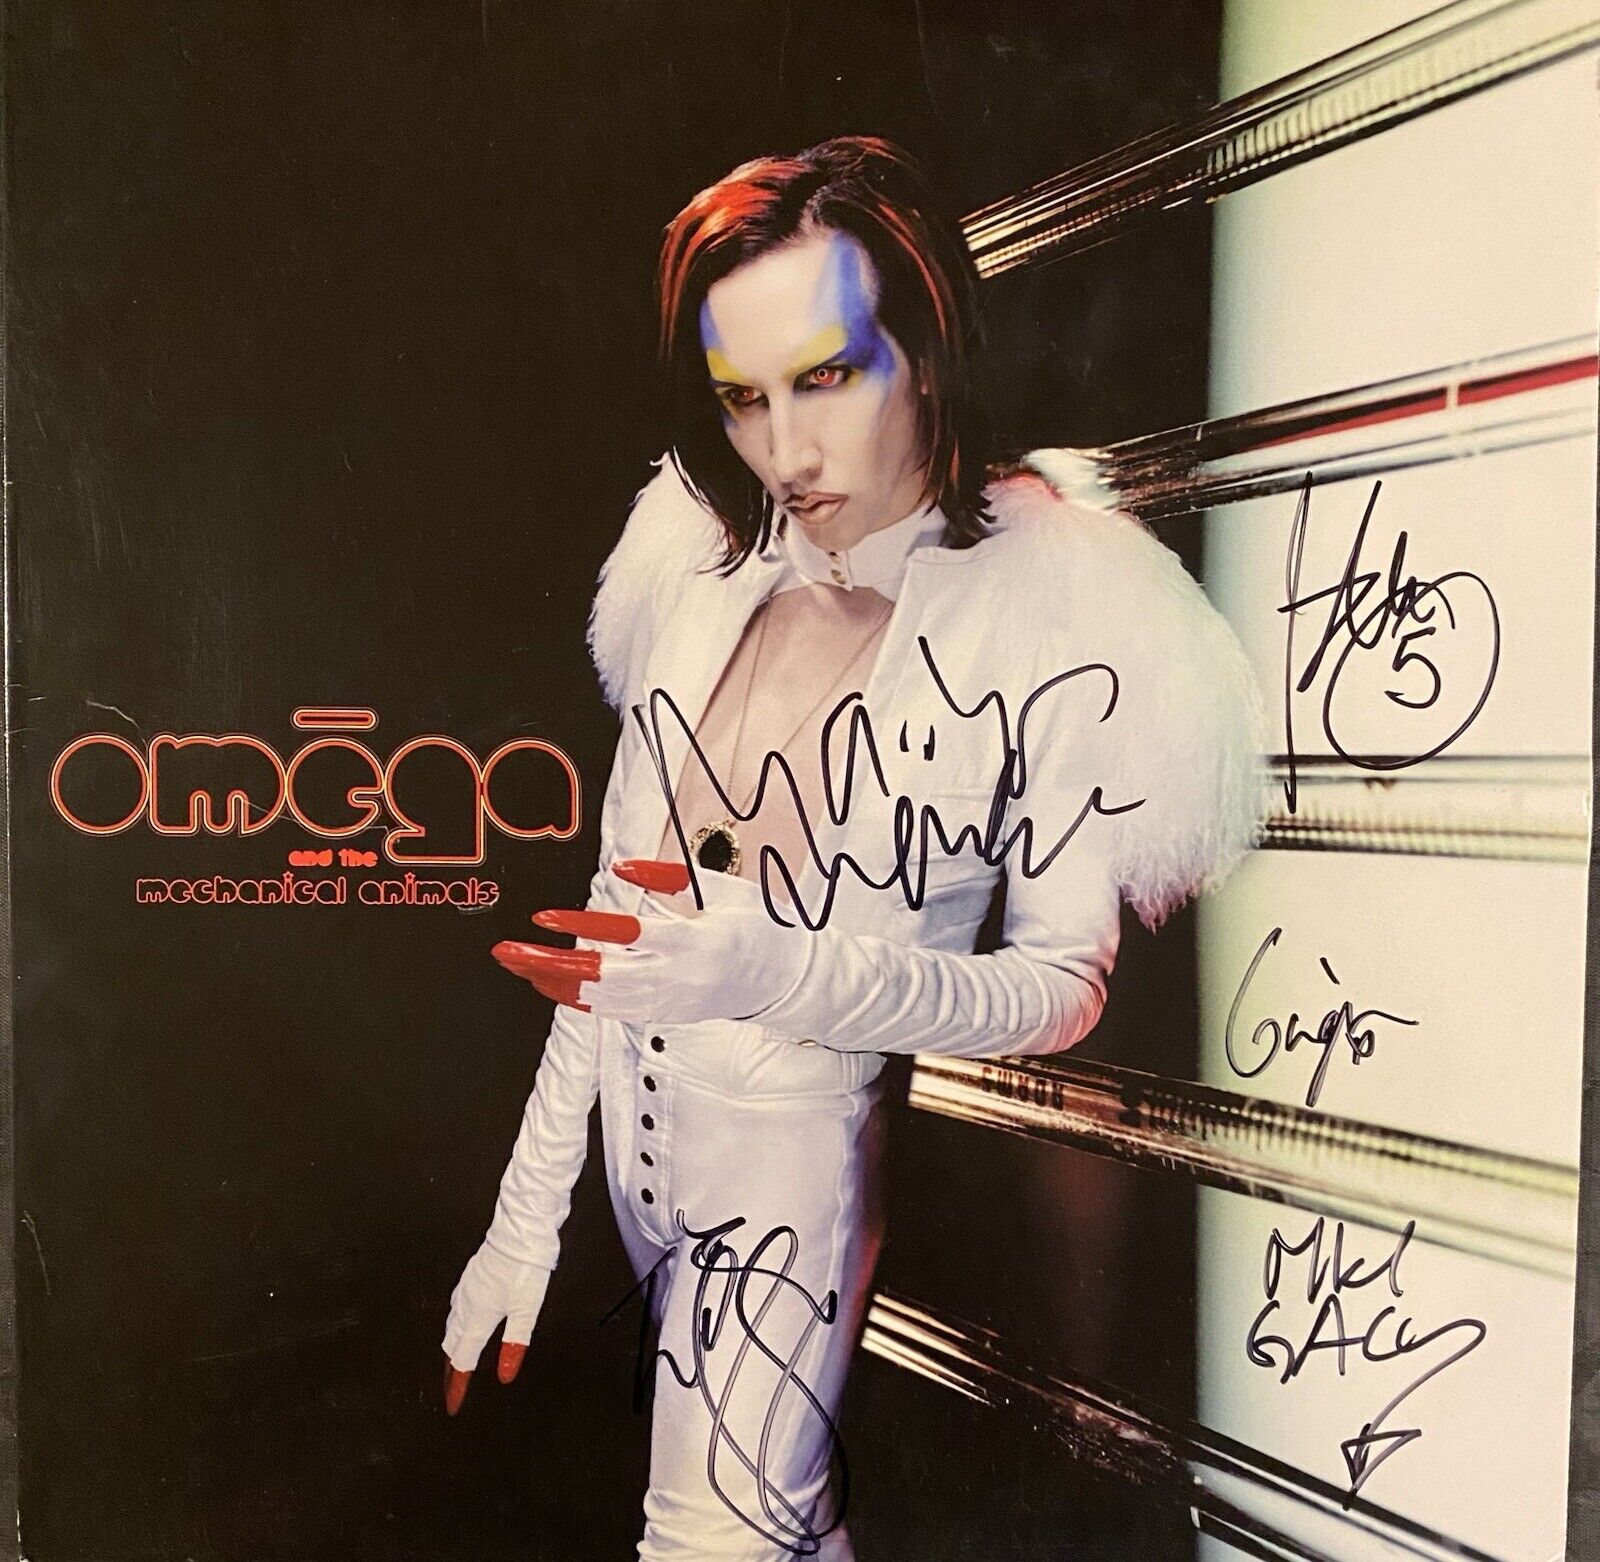 Marilyn Manson Band Signed Mechanical Animals Vinyl LP Autographed